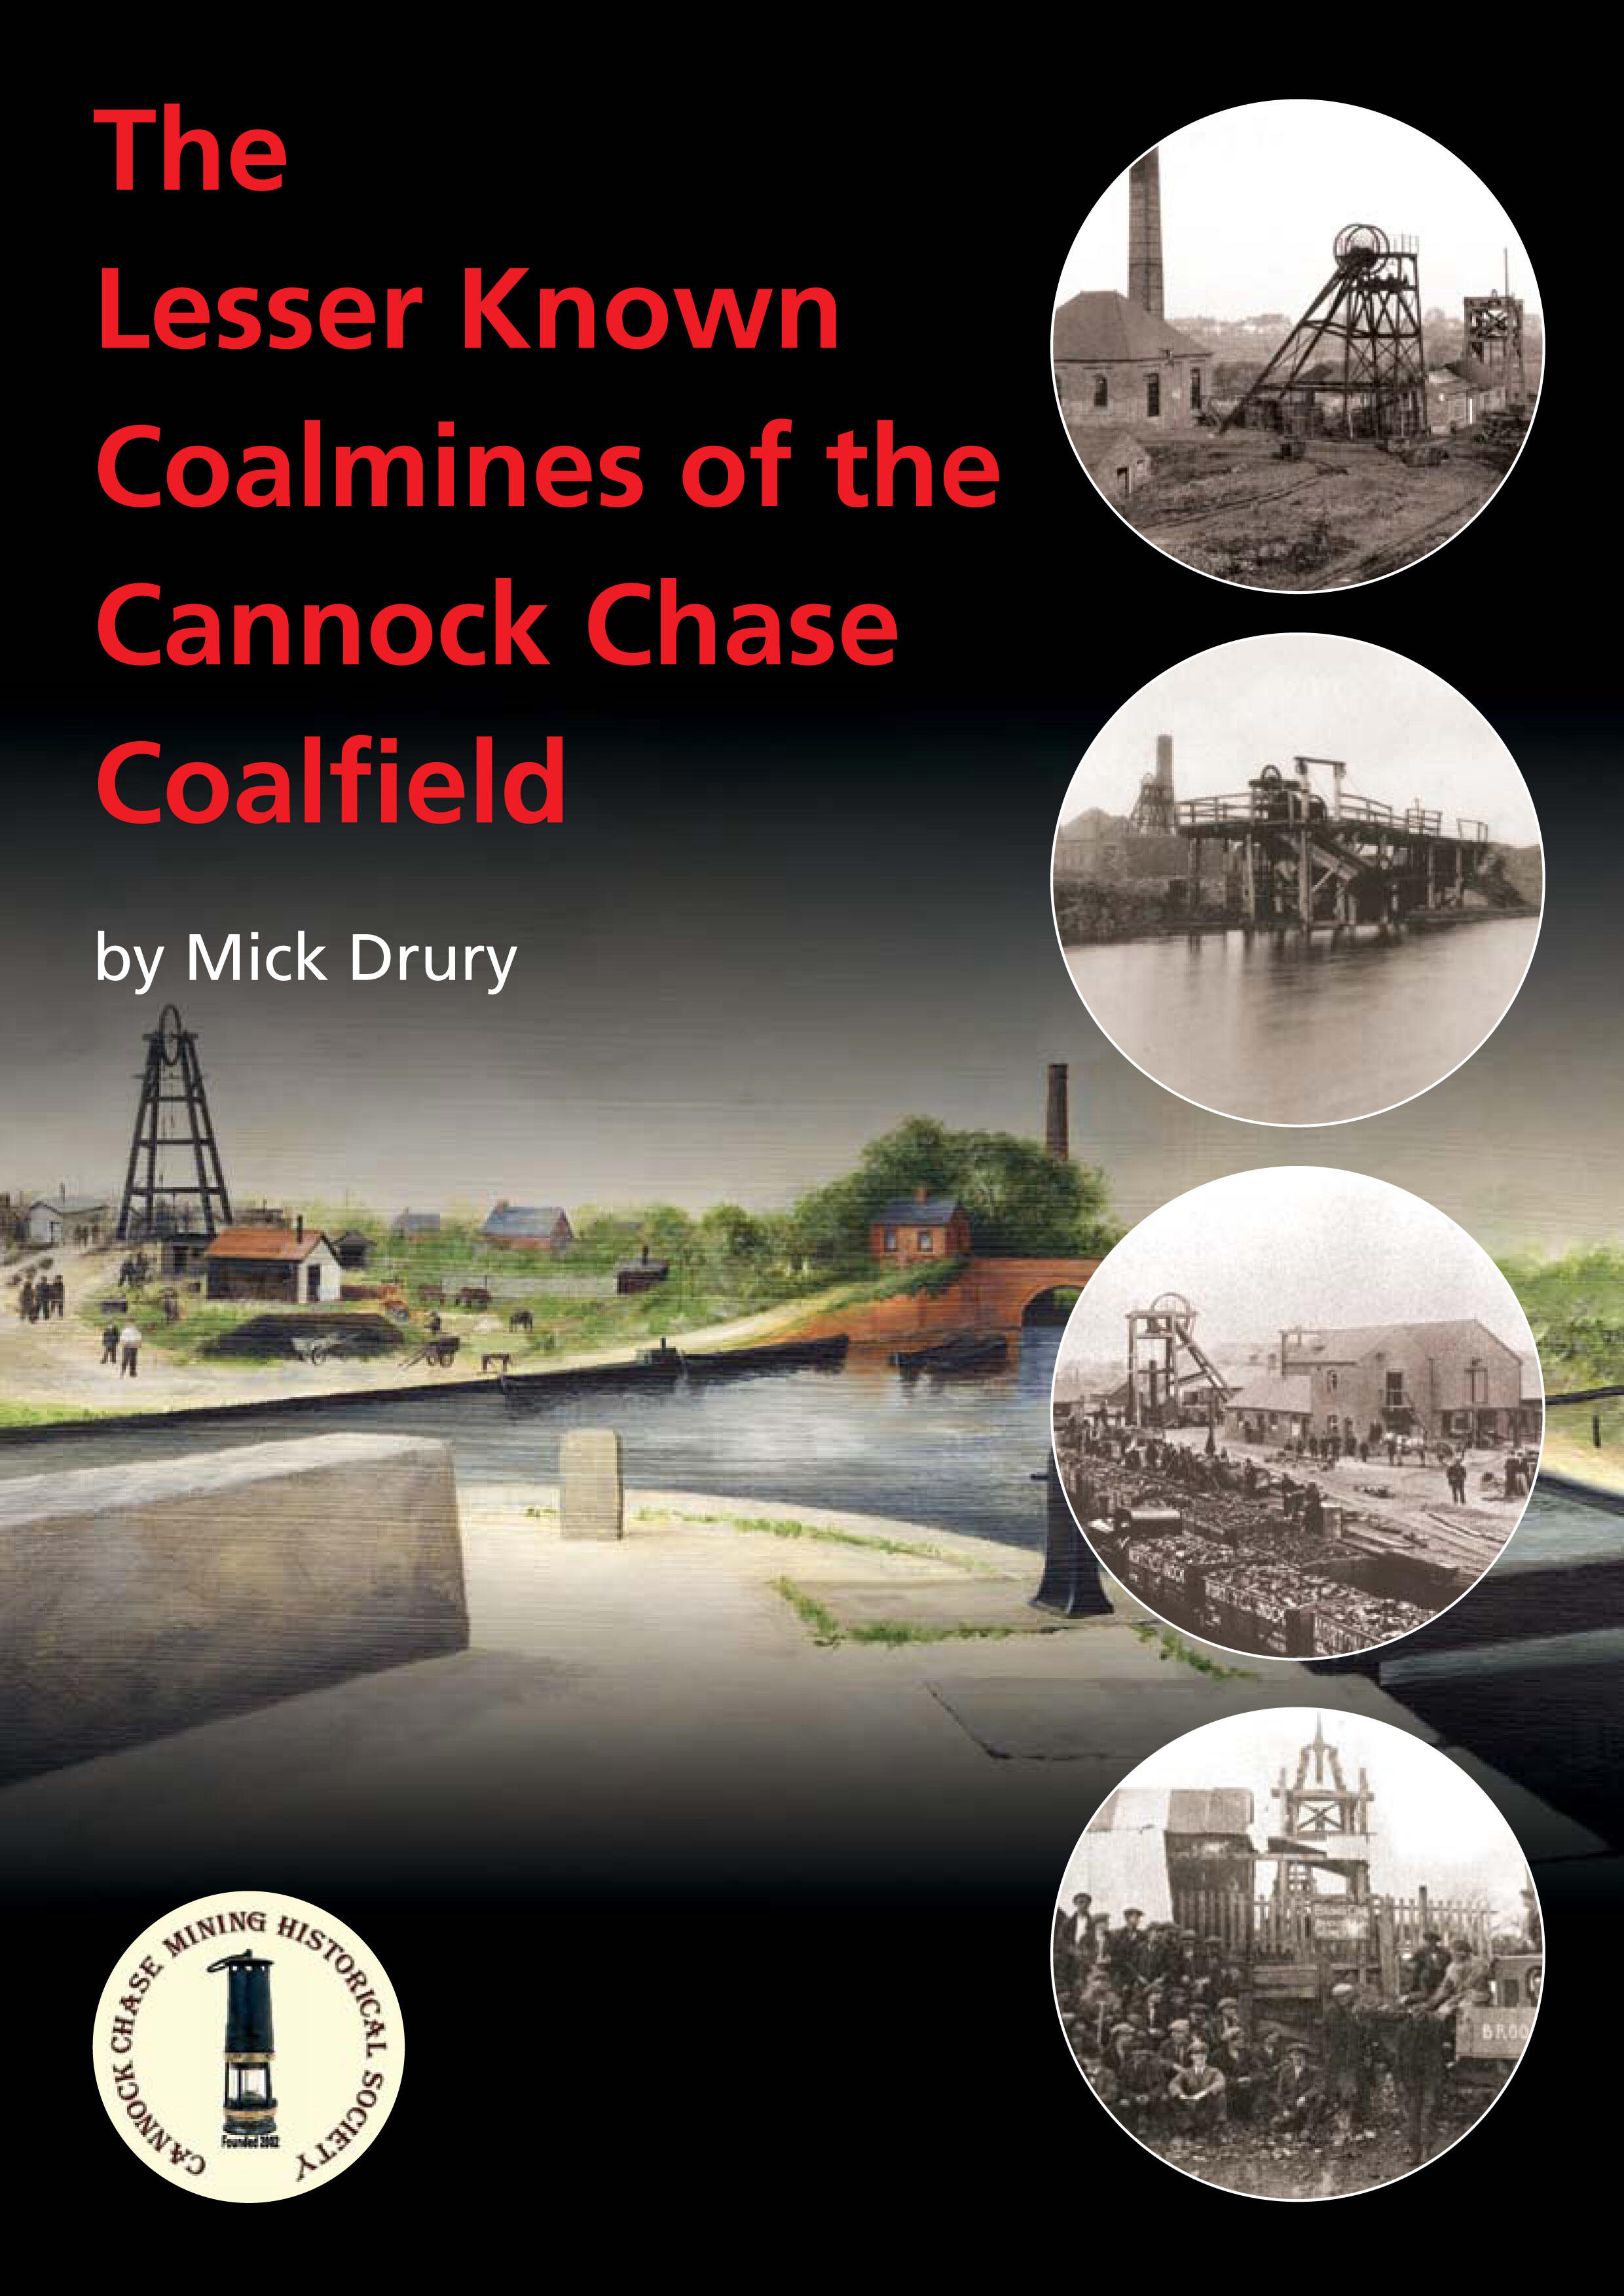 The Lesser Known Mines of the Cannock Chase Coalfield